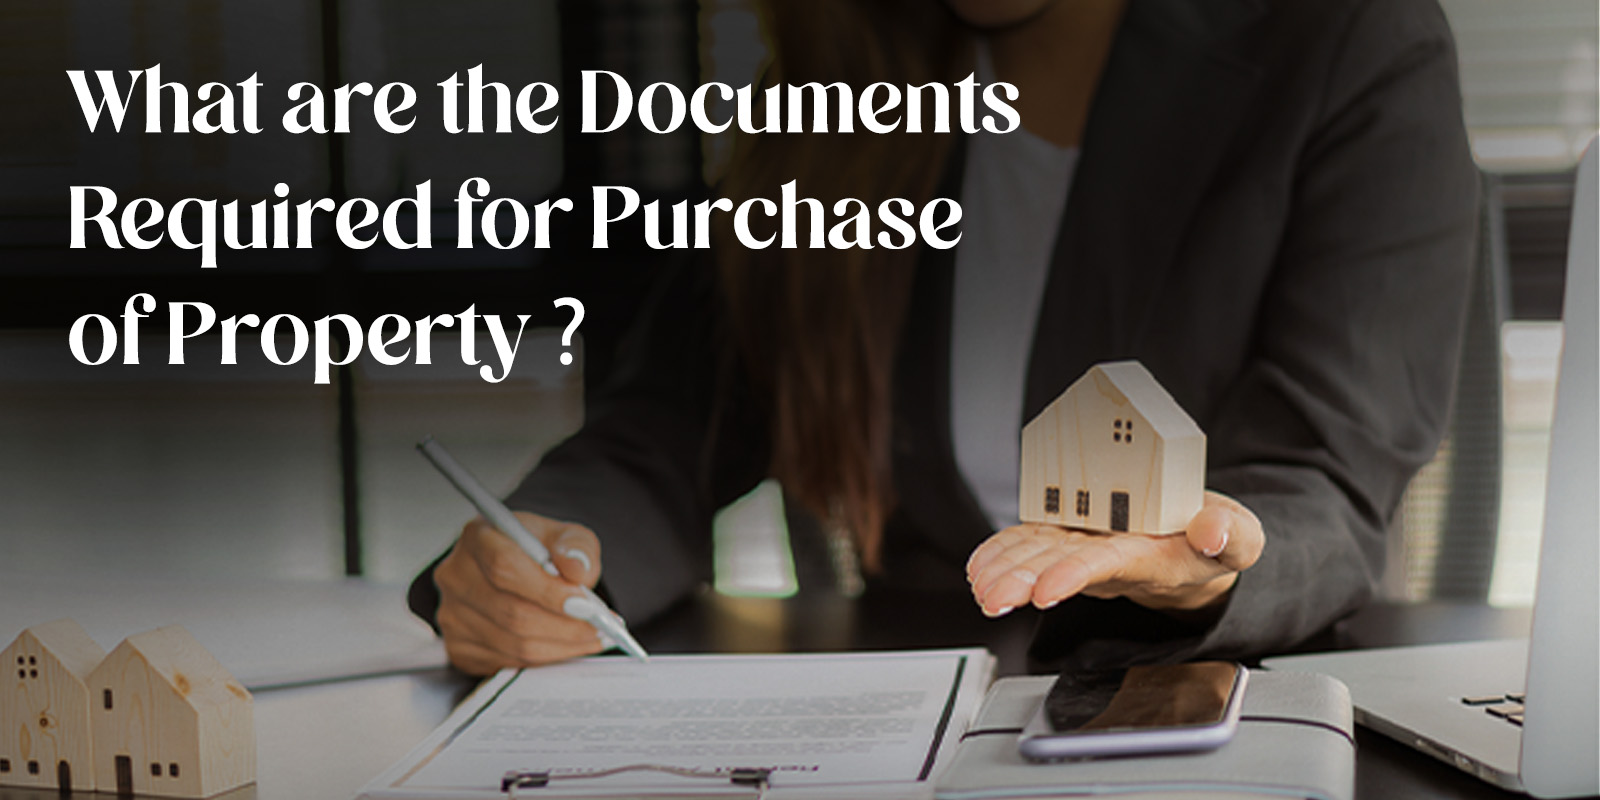 What Are the Documents Required for Purchase of Property?